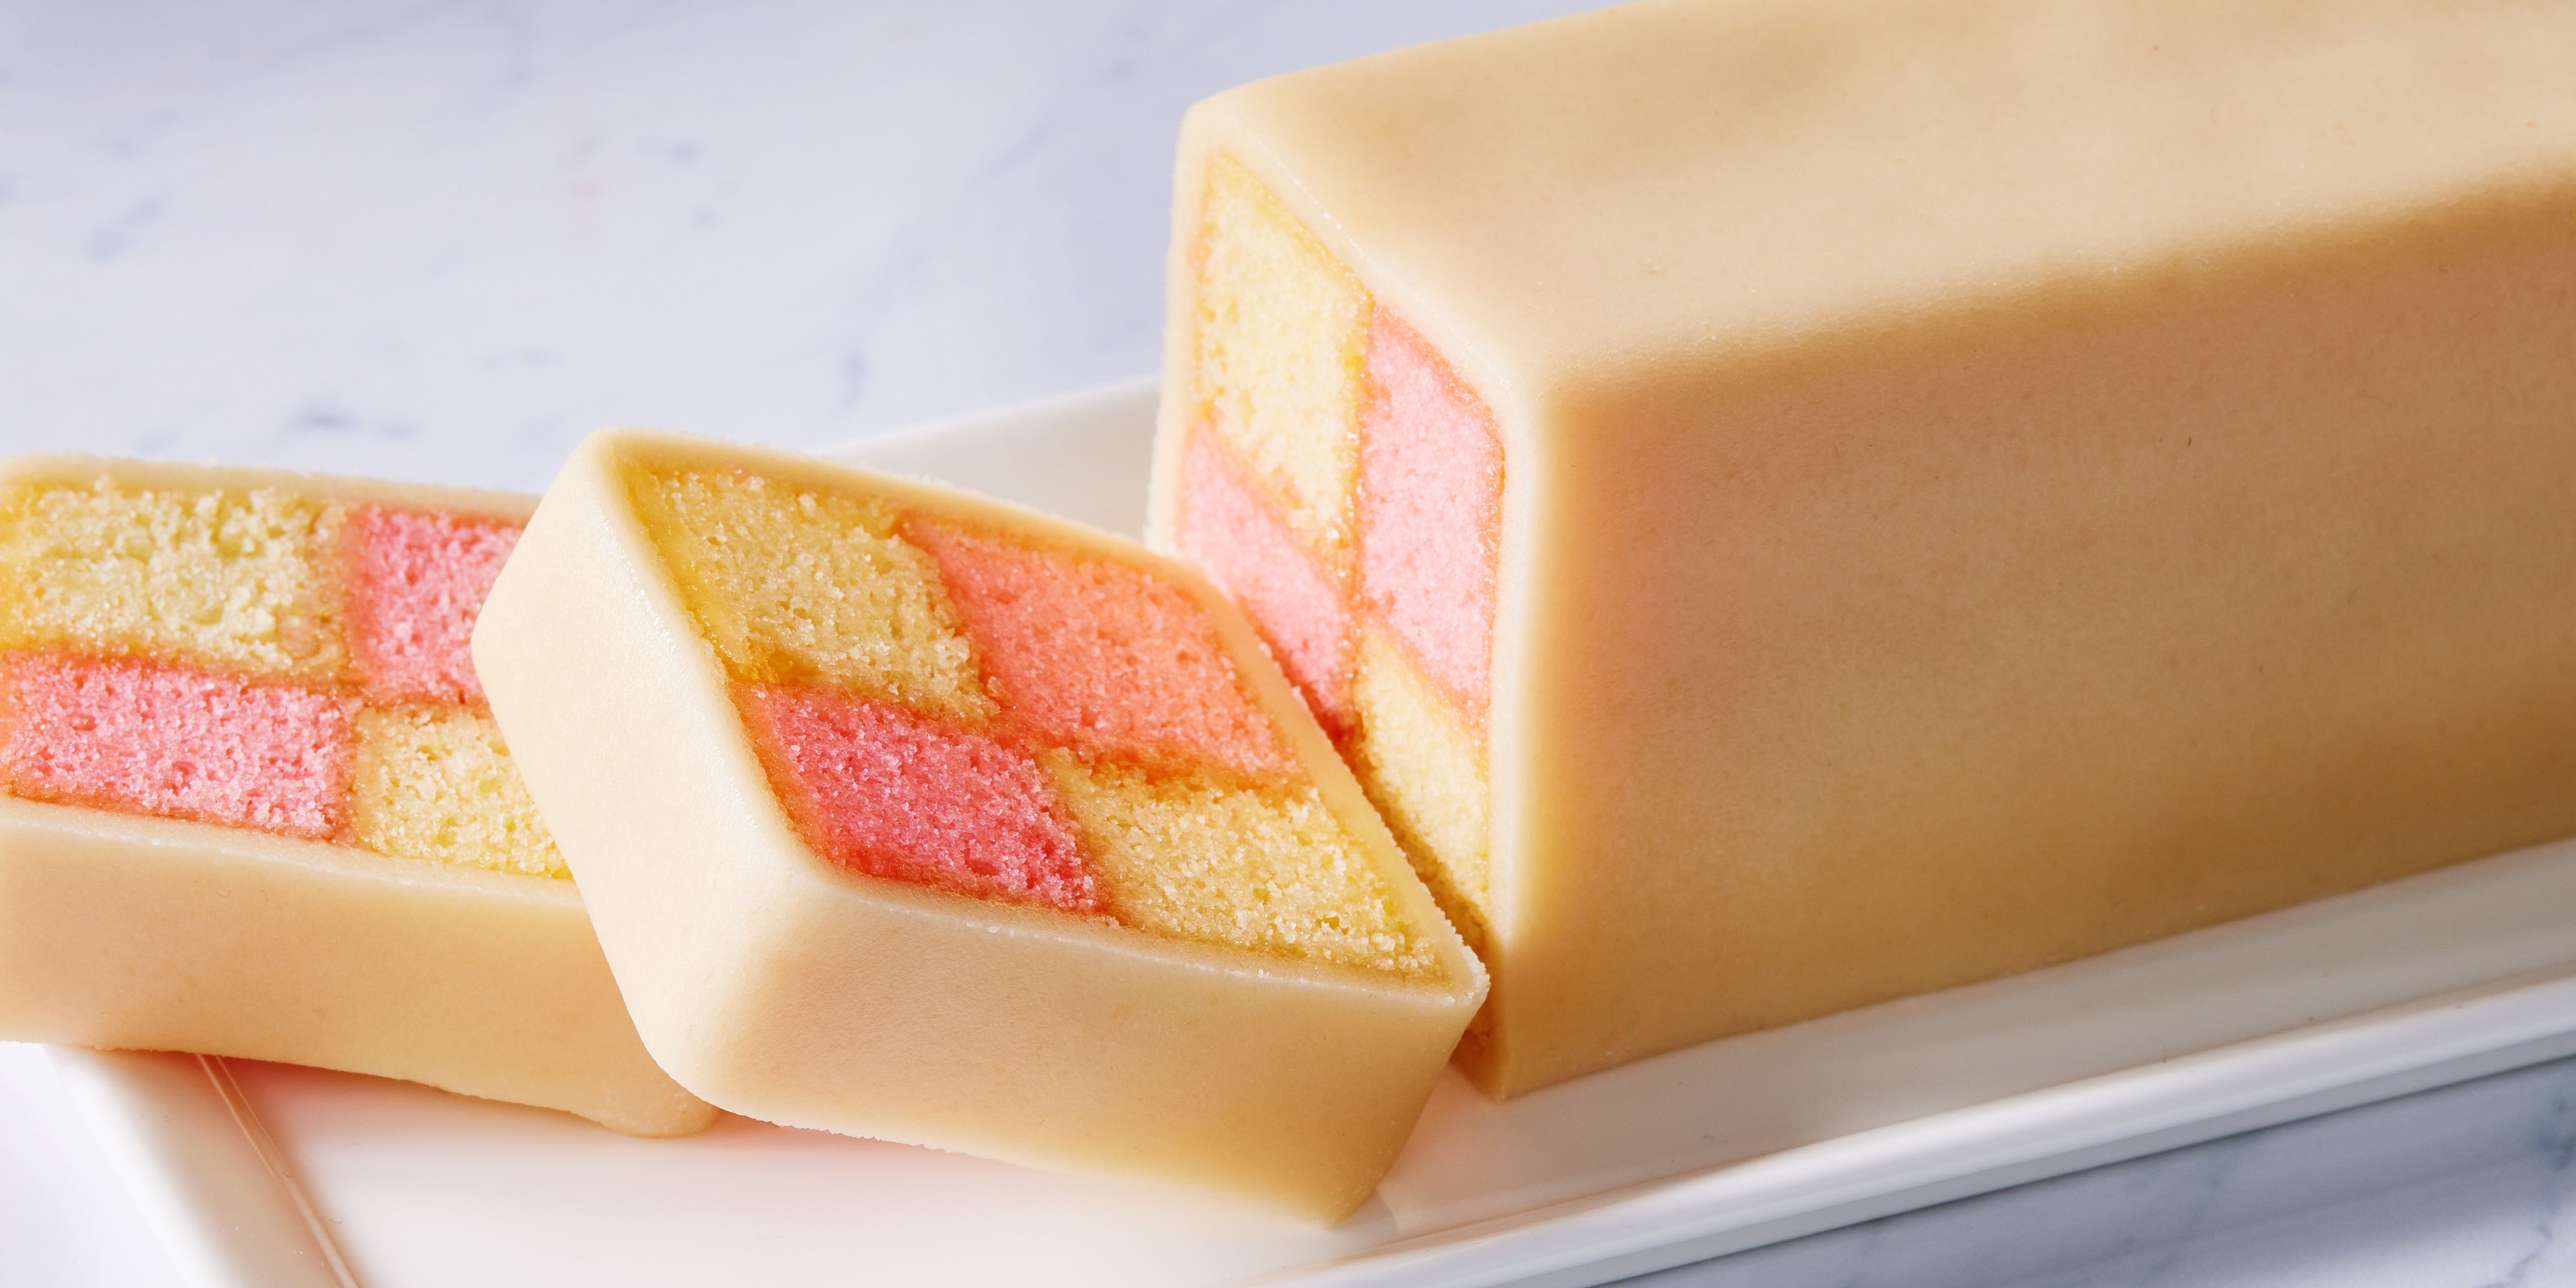 Battenberg Cake  We Are Tate and Lyle Sugars